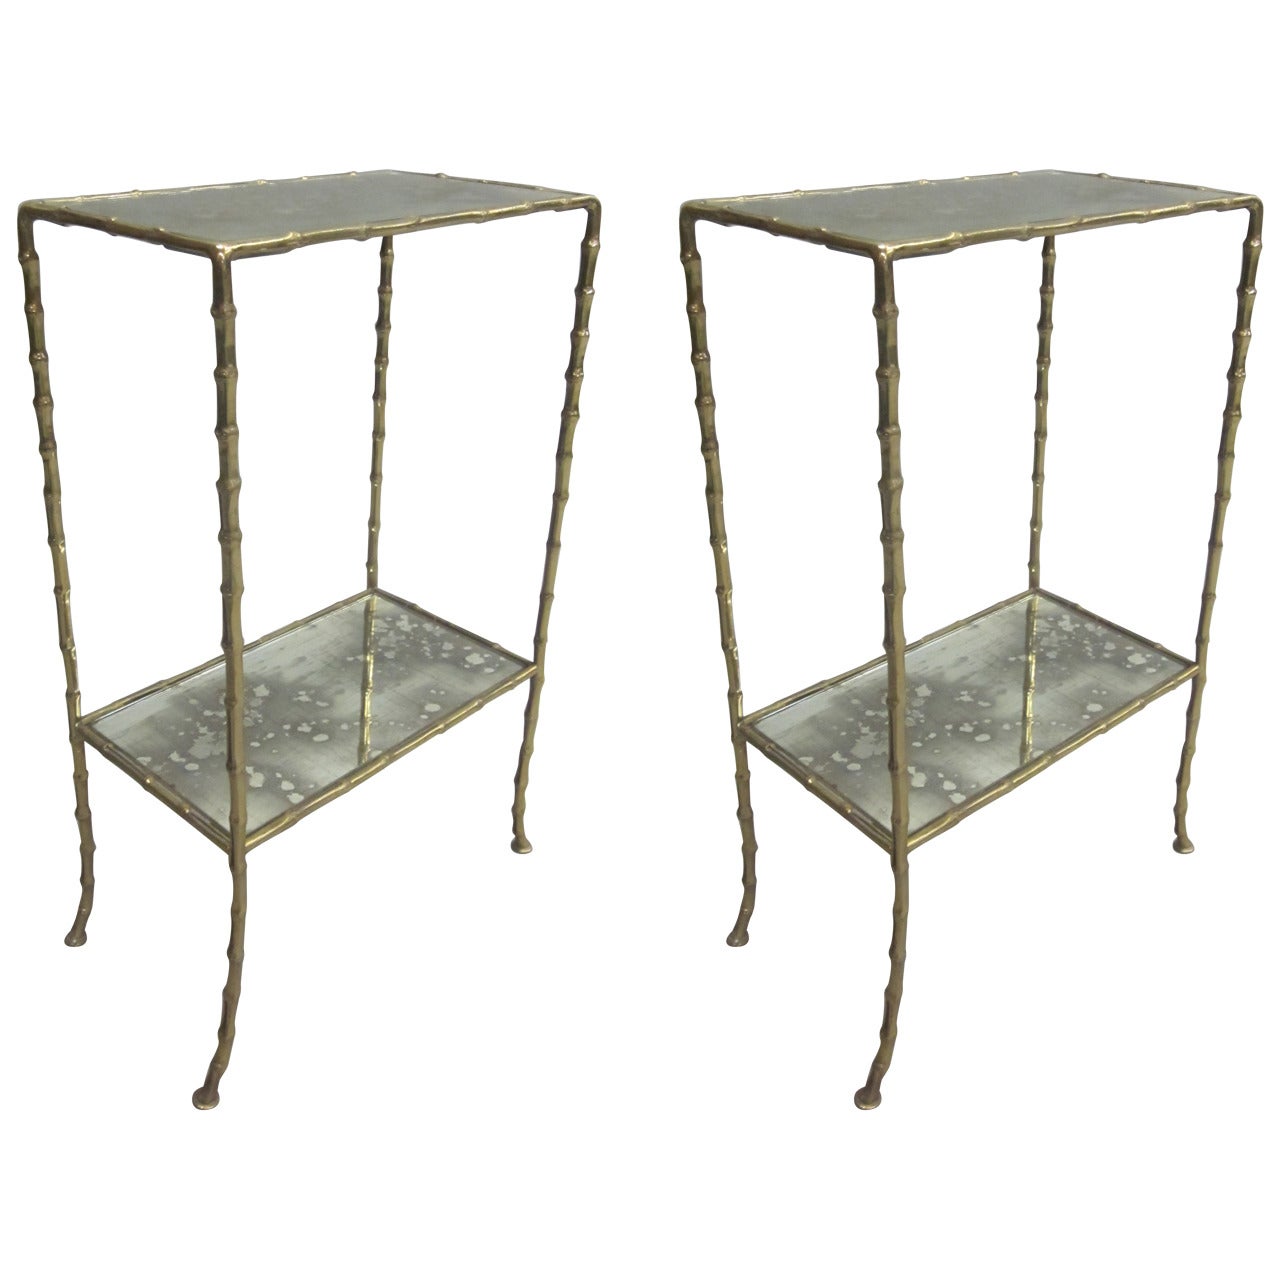 Pair French Mid-Century Brass Faux Bamboo & Mirrored Side Tables, Maison Baguès